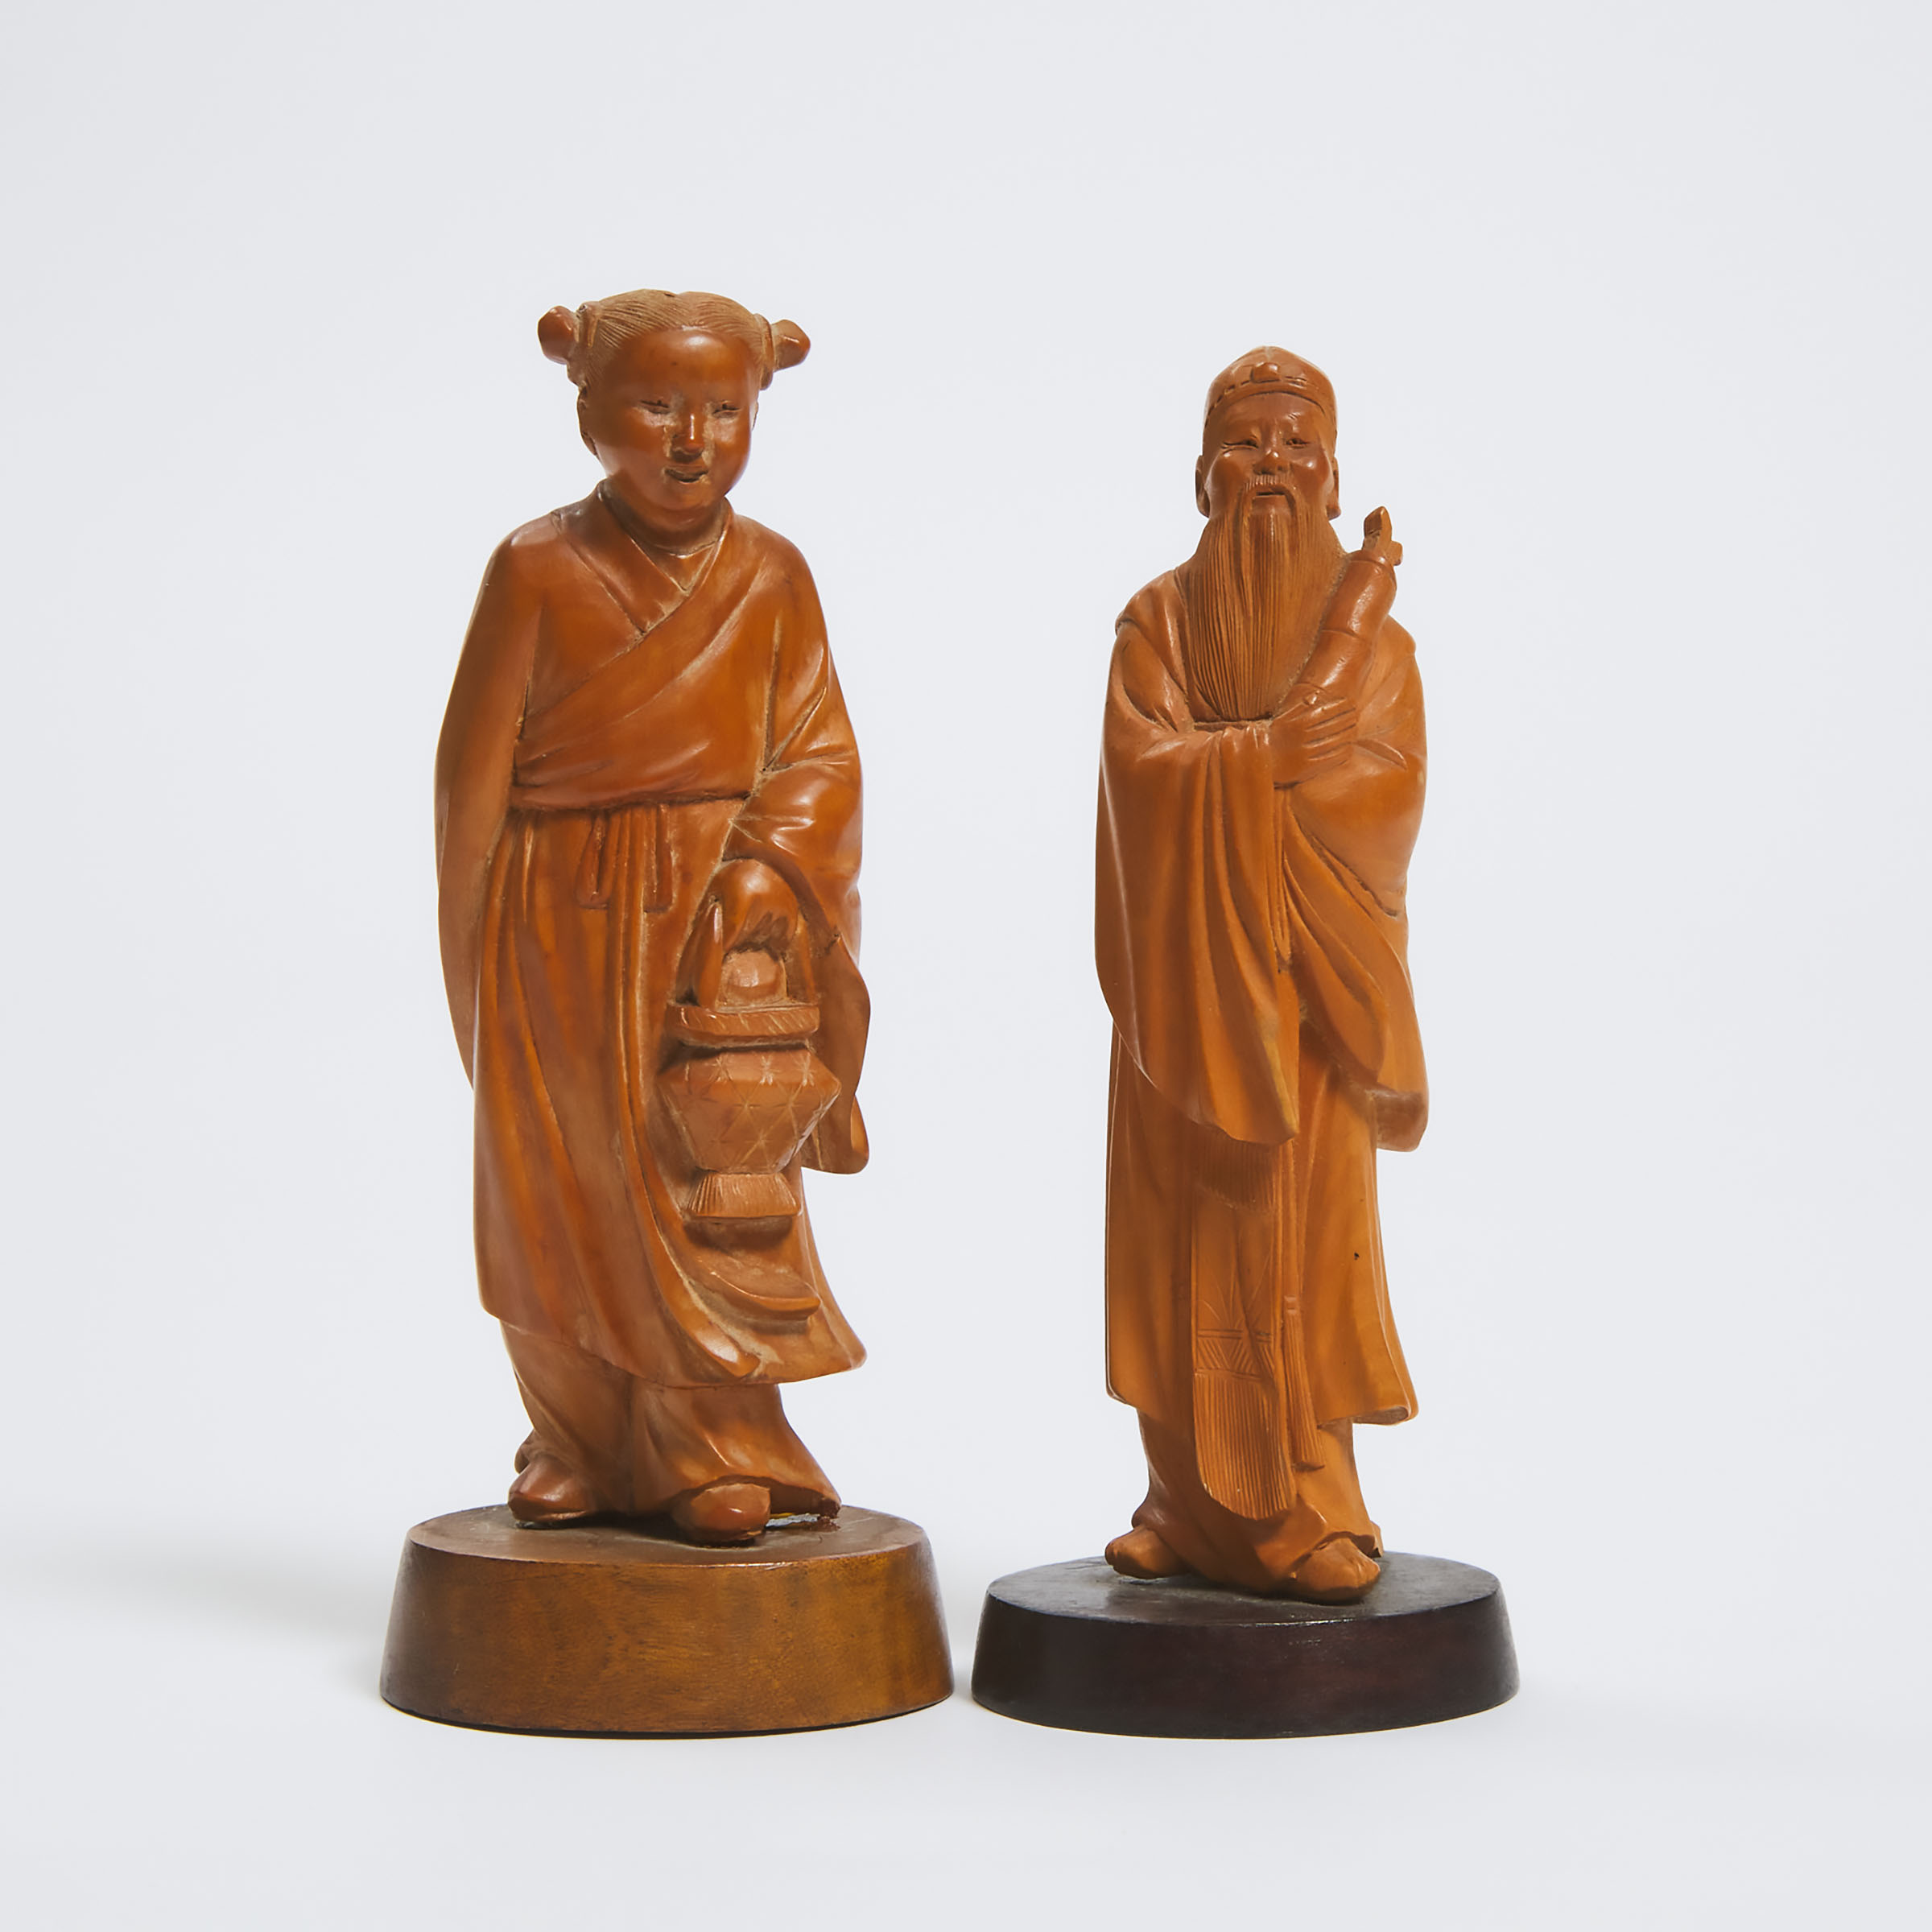 A Boxwood Figure of the Daoist Immortal Lan Caihe, Together With a Daoist Scholar, Republican Period, Early to Mid 20th Century